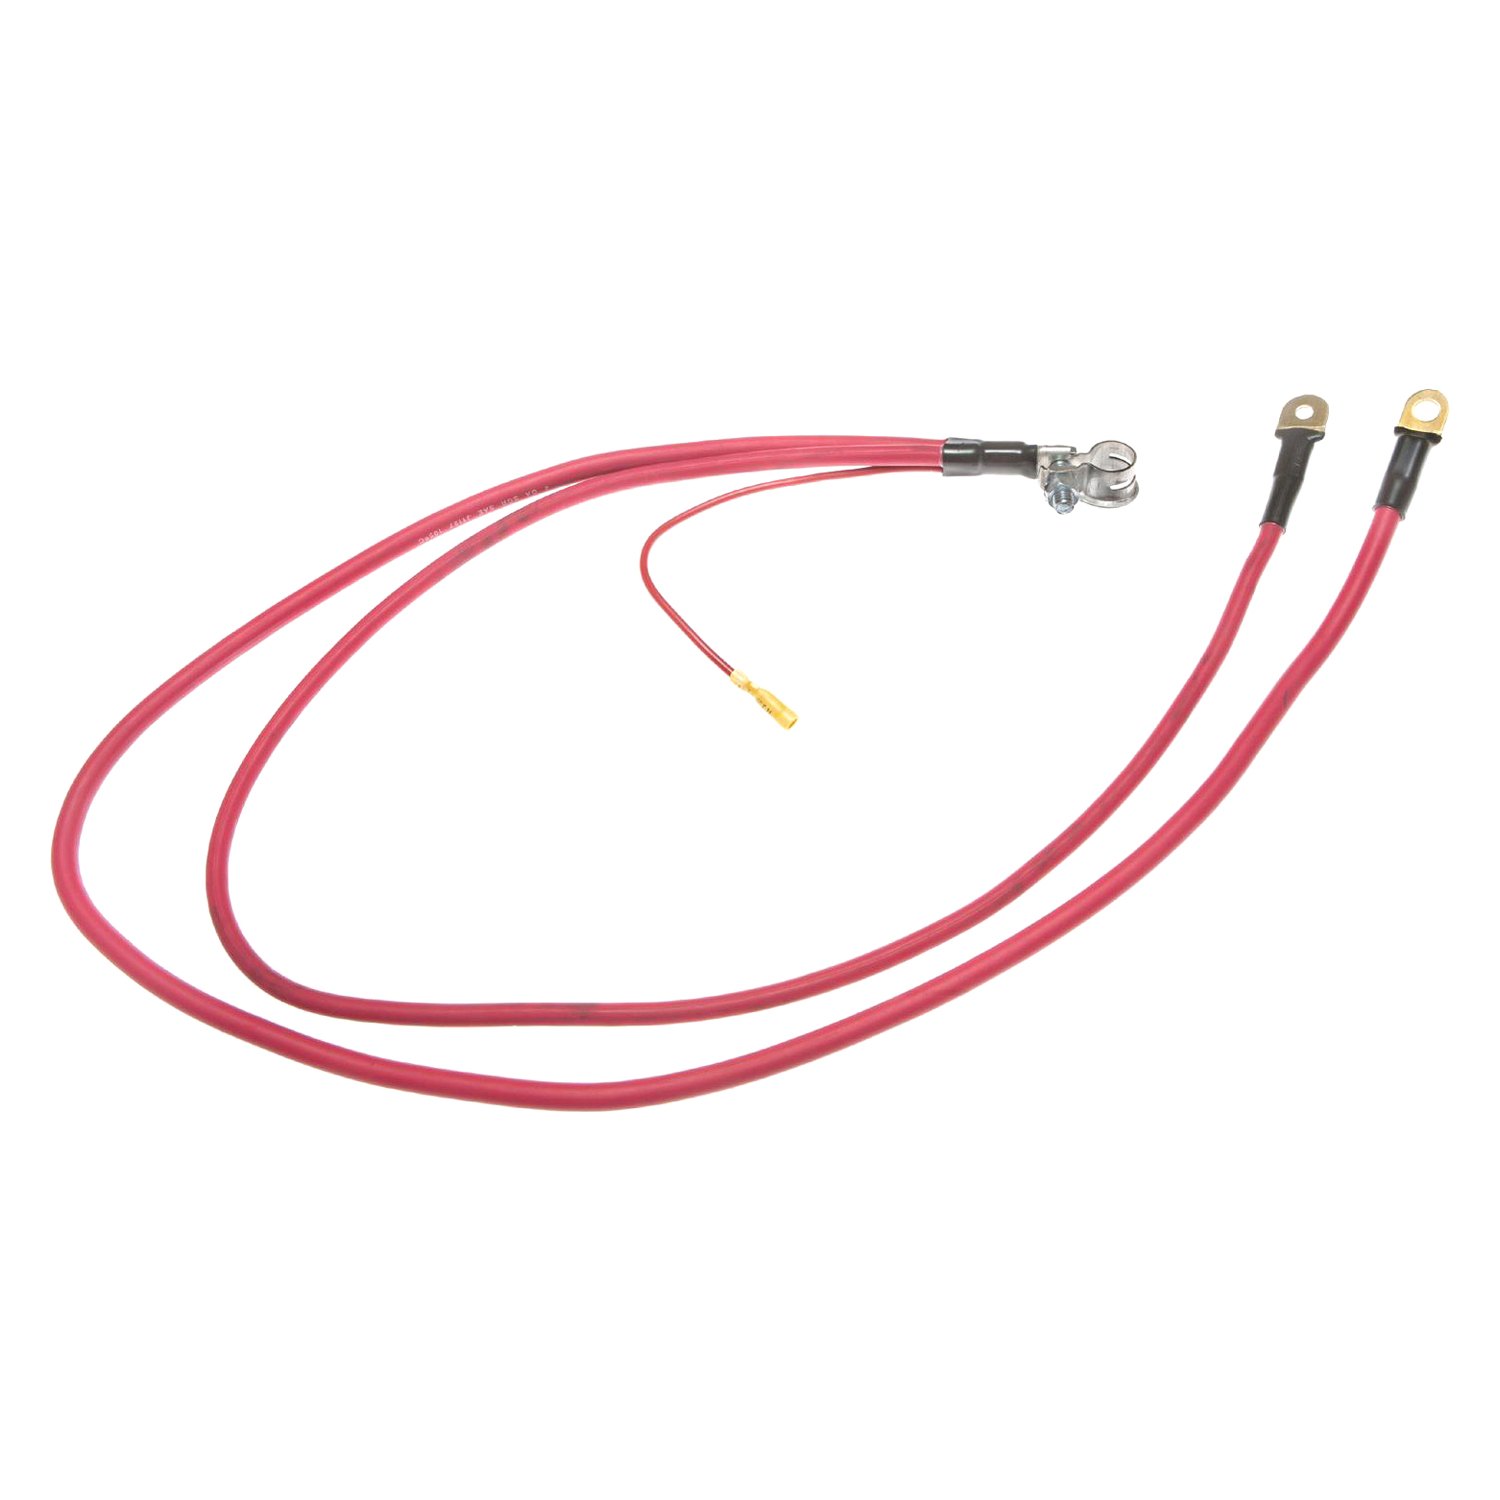 Battery cable. Bal 30 Battery Cable dc2002mn00. ZTE с320 Battery Cable. Батарея кабель для презентации. Battery Cable: 0,3x19 PCS System.